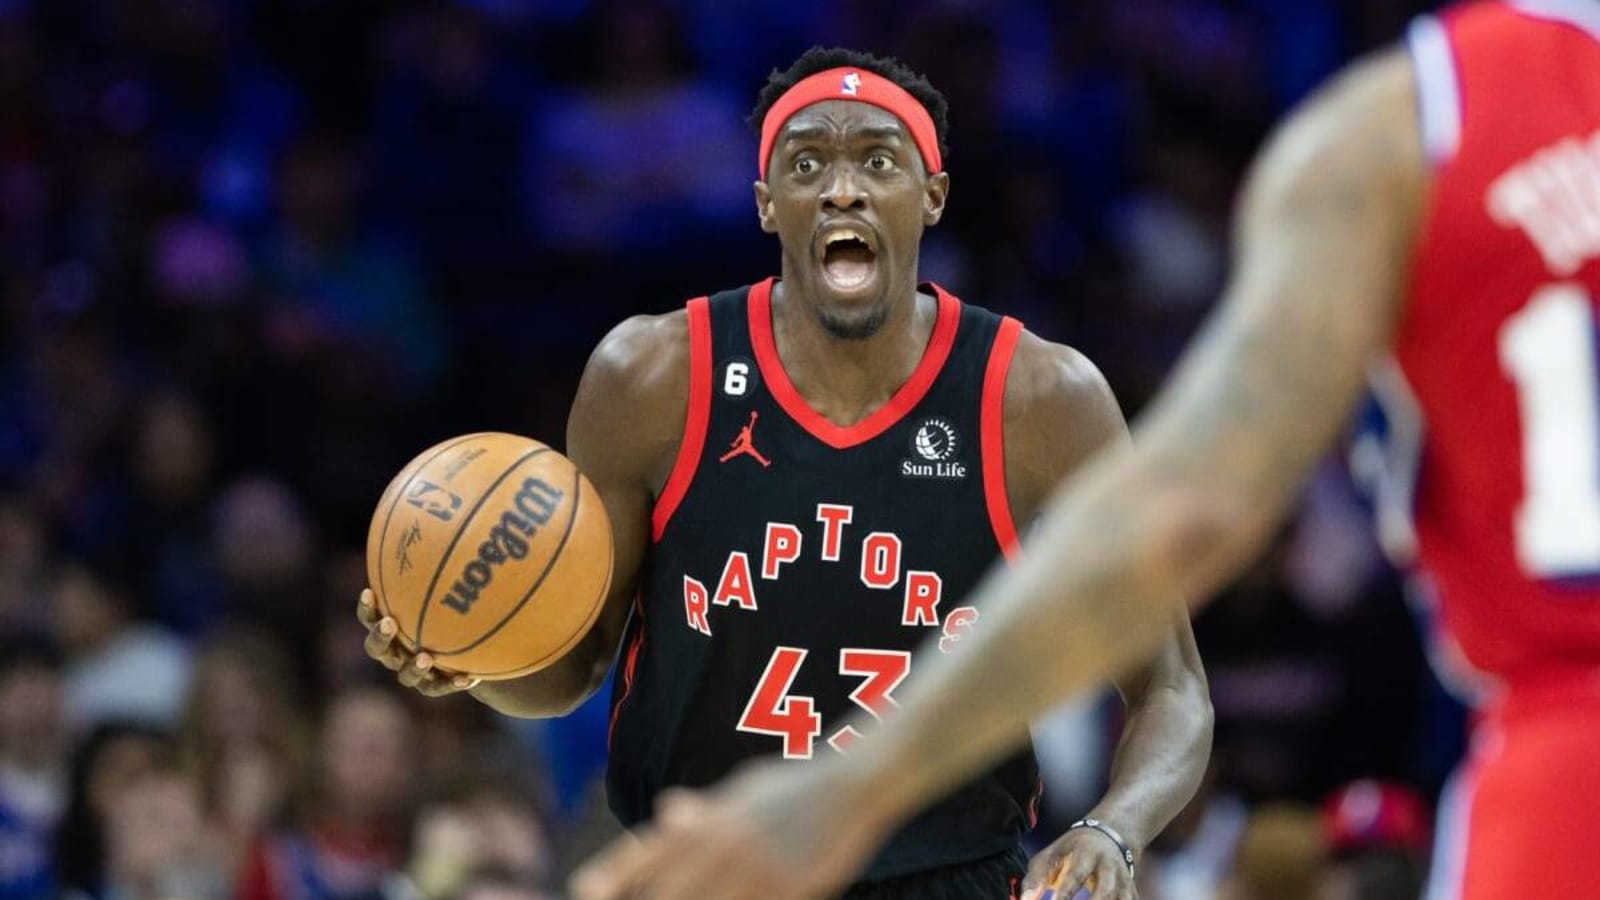 Pascal Siakam Falls Short of All-NBA Honors As Contract Extension Questions Loom